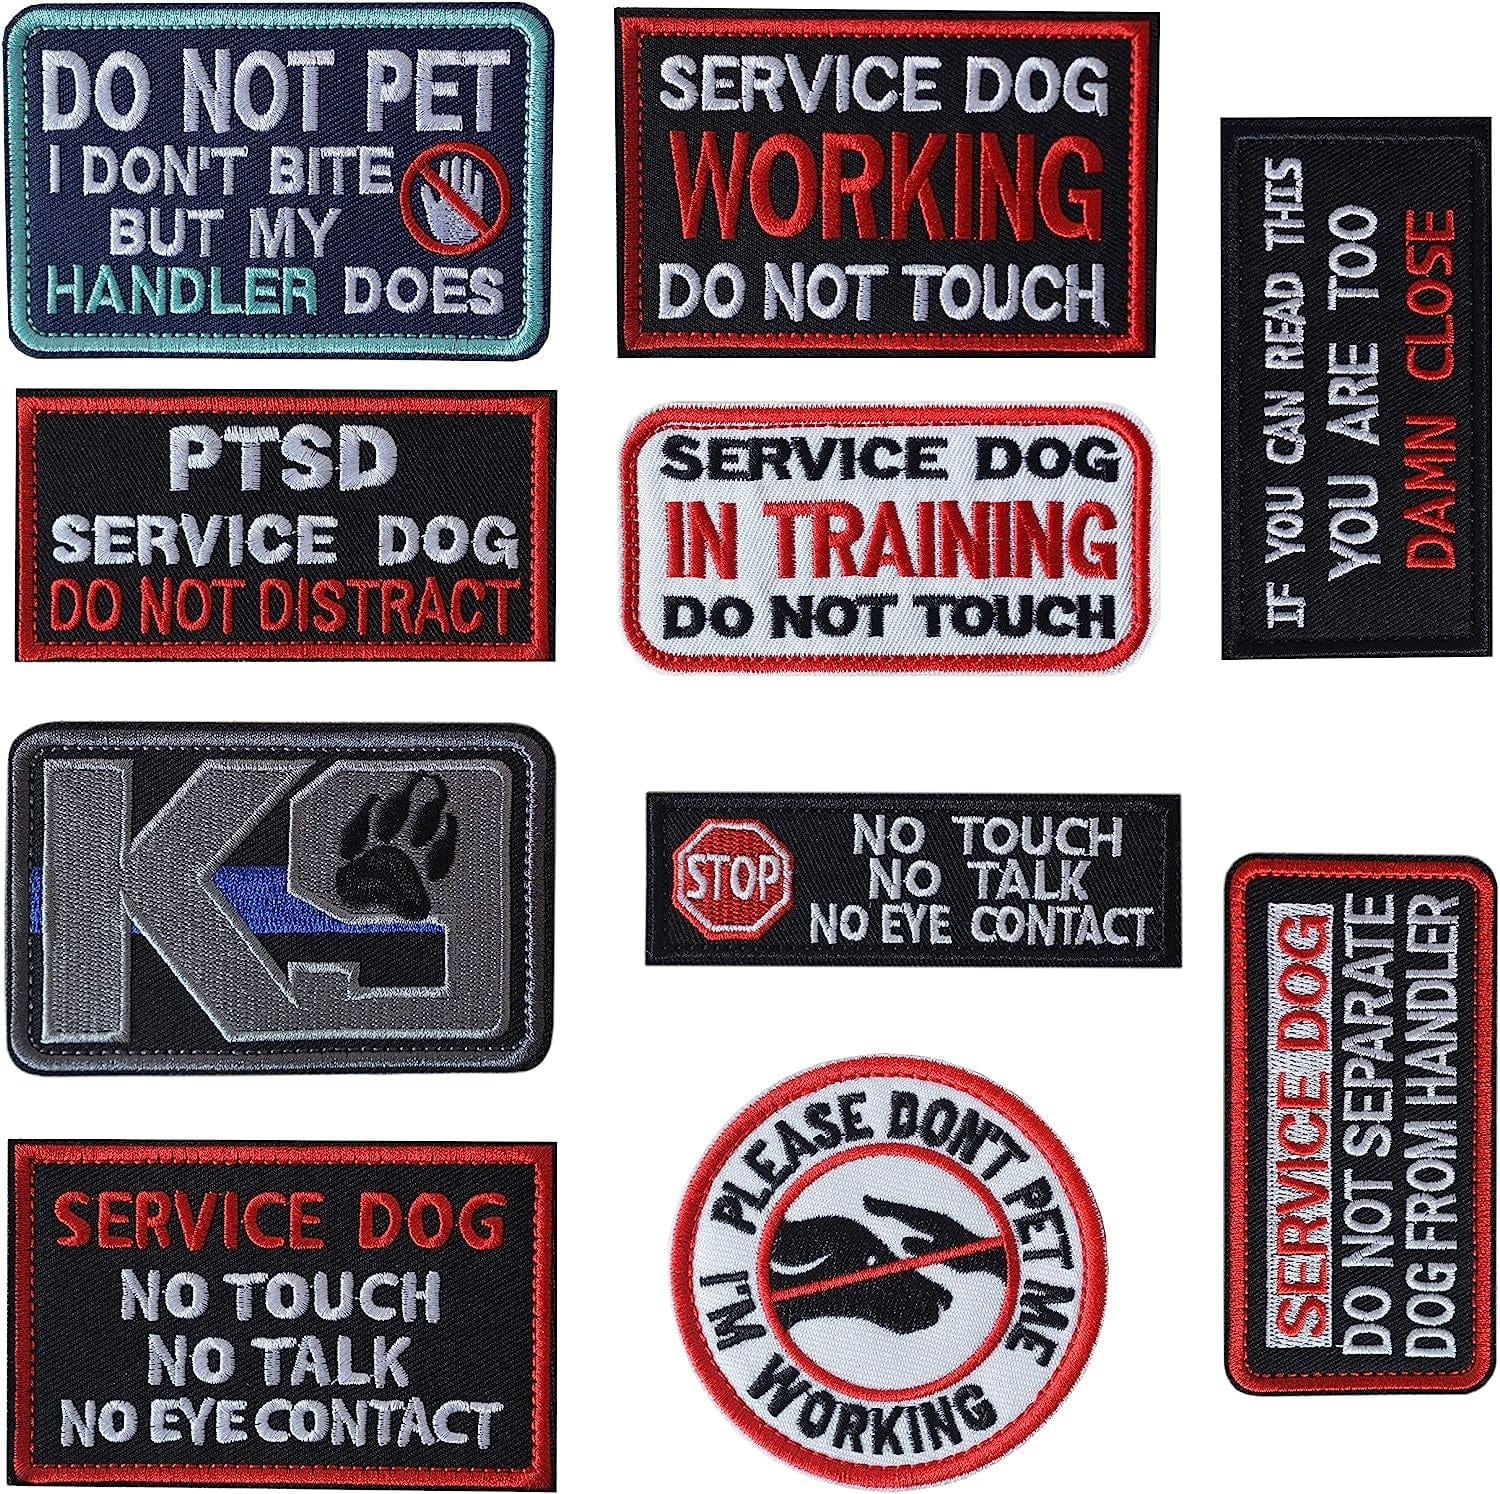 I'm Friendly Please Pet Me Rectangular Service Dog Sew On Patch for Vest  or Harness